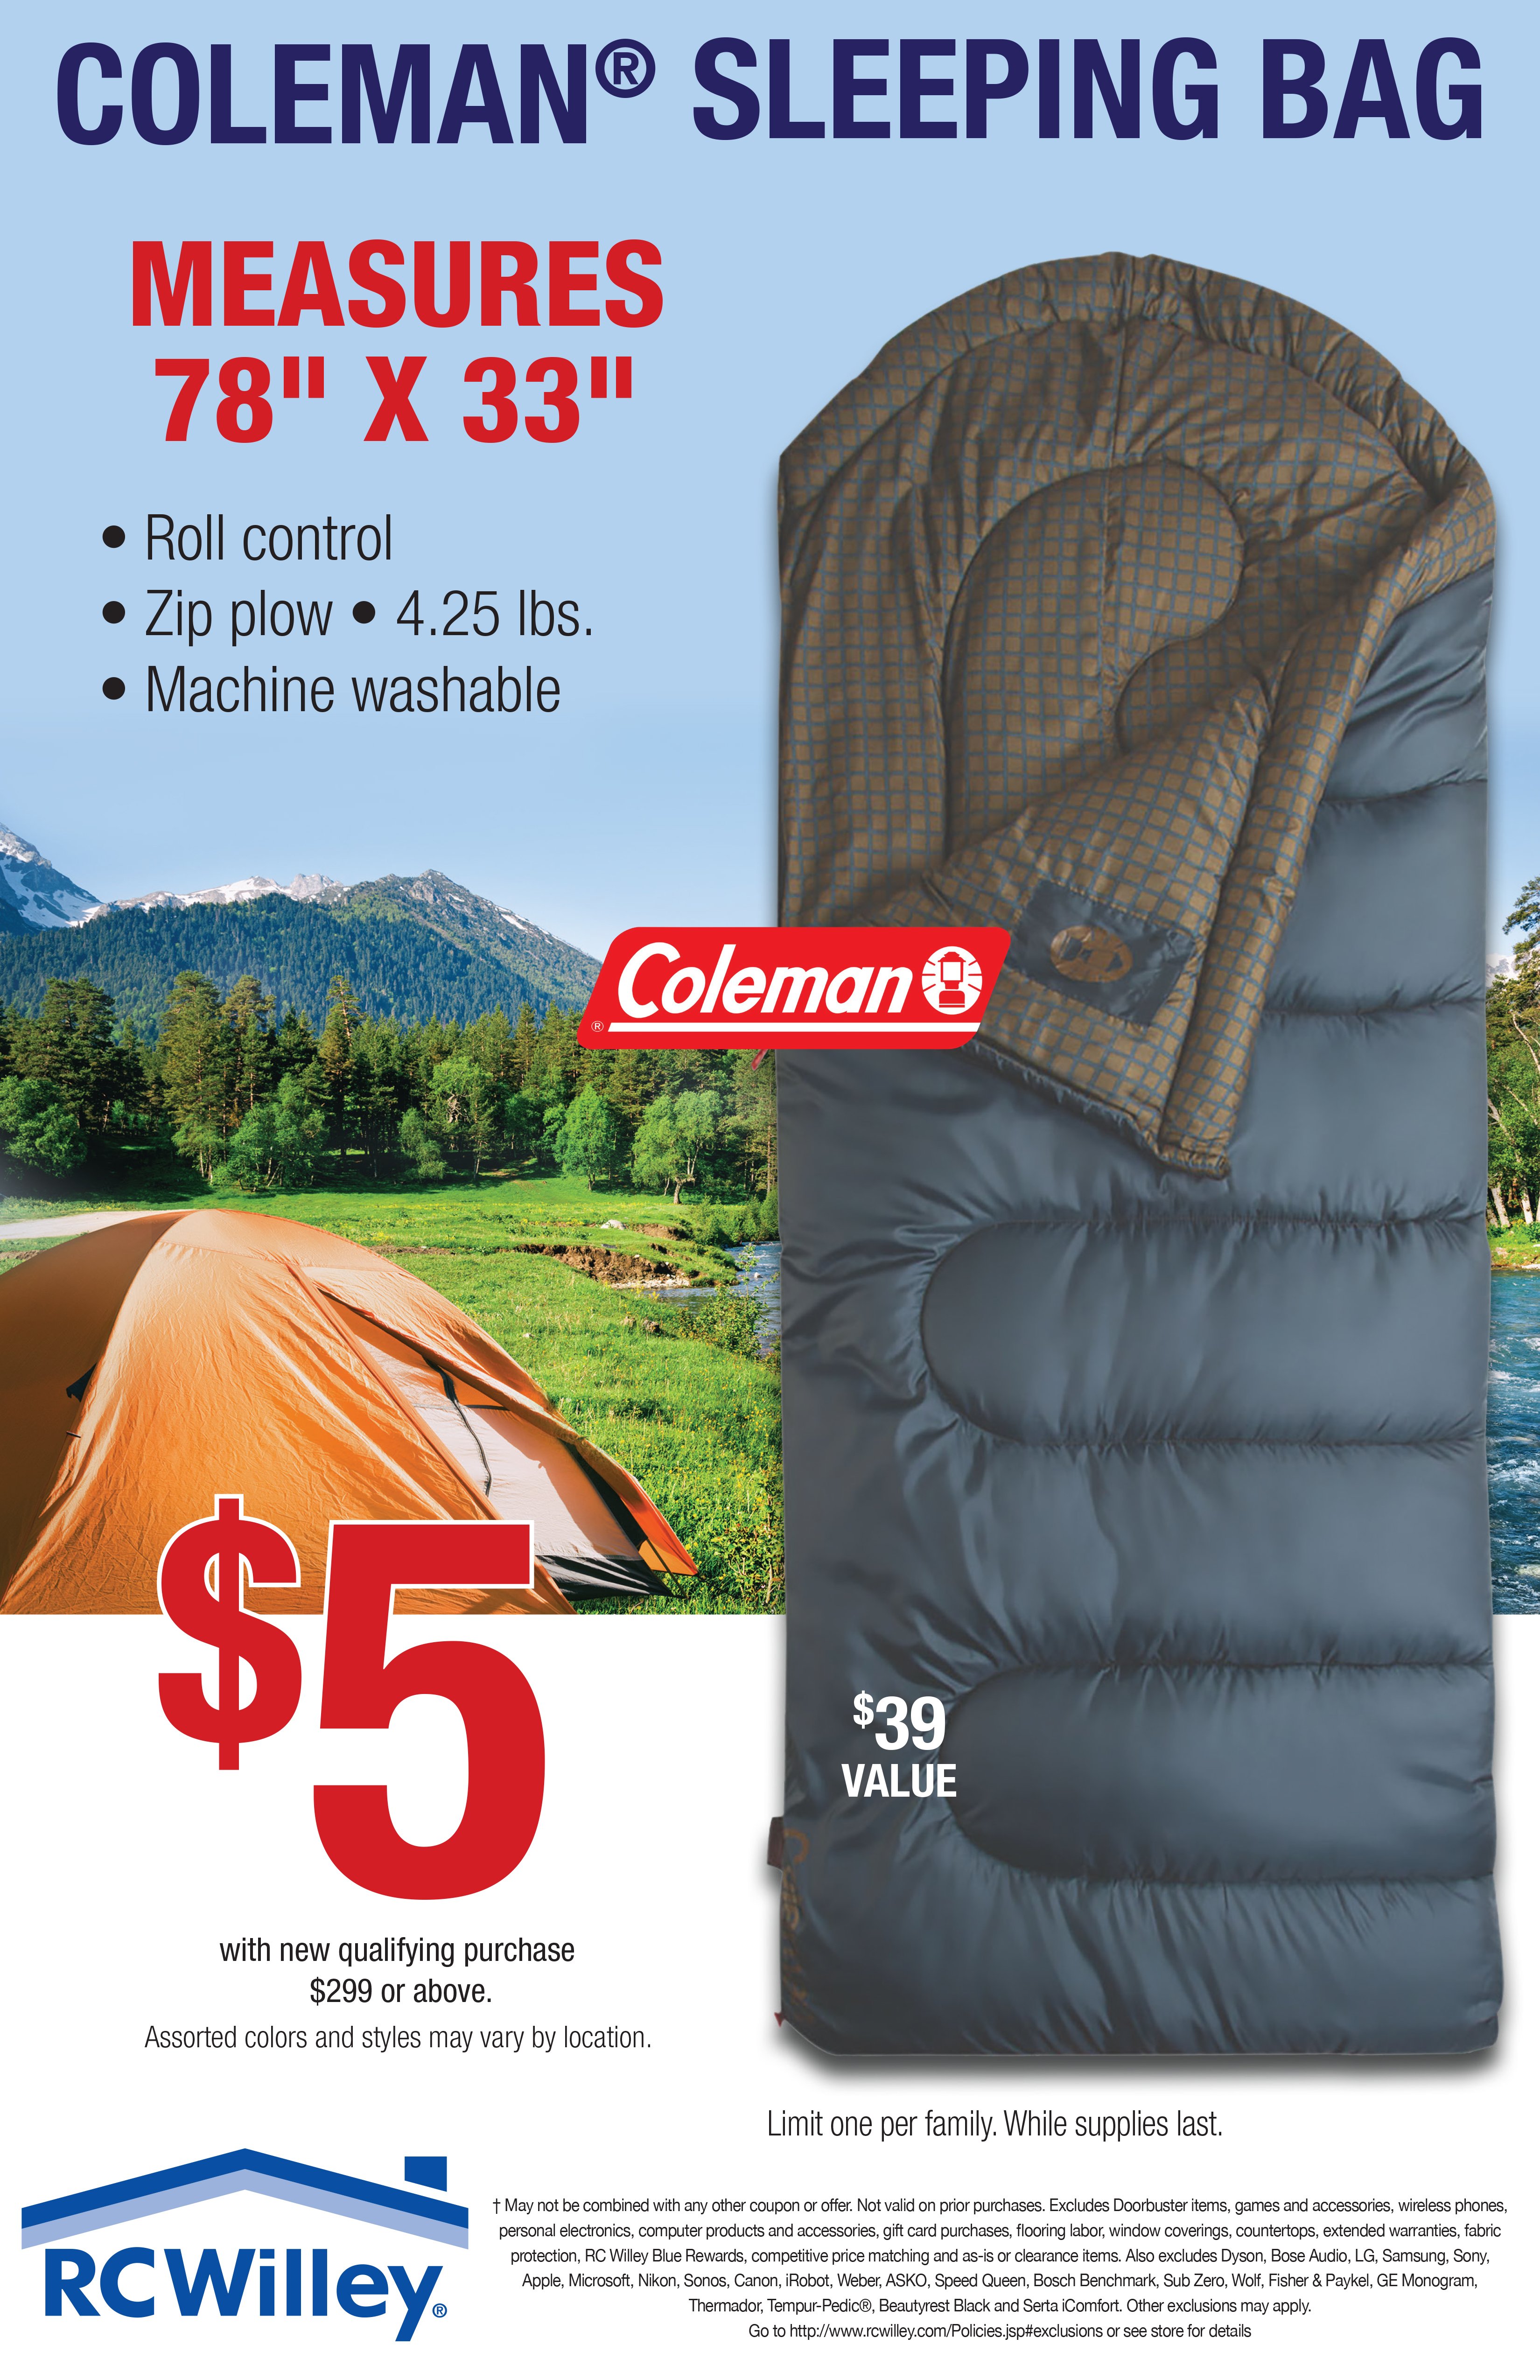 ColemanÂ® Sleeping Bag $5 with new qualifying purchase $299 or above. $39 value. Limit one per family While supplies last. Measures 78 inches by 33 inches. â¢ Roll control â¢ Zip plow â¢ 4.25 lbs. â¢ Machine washable. Some exclusions apply go to http://www.rcwilley.com/Policies#exclusions or see store for details.